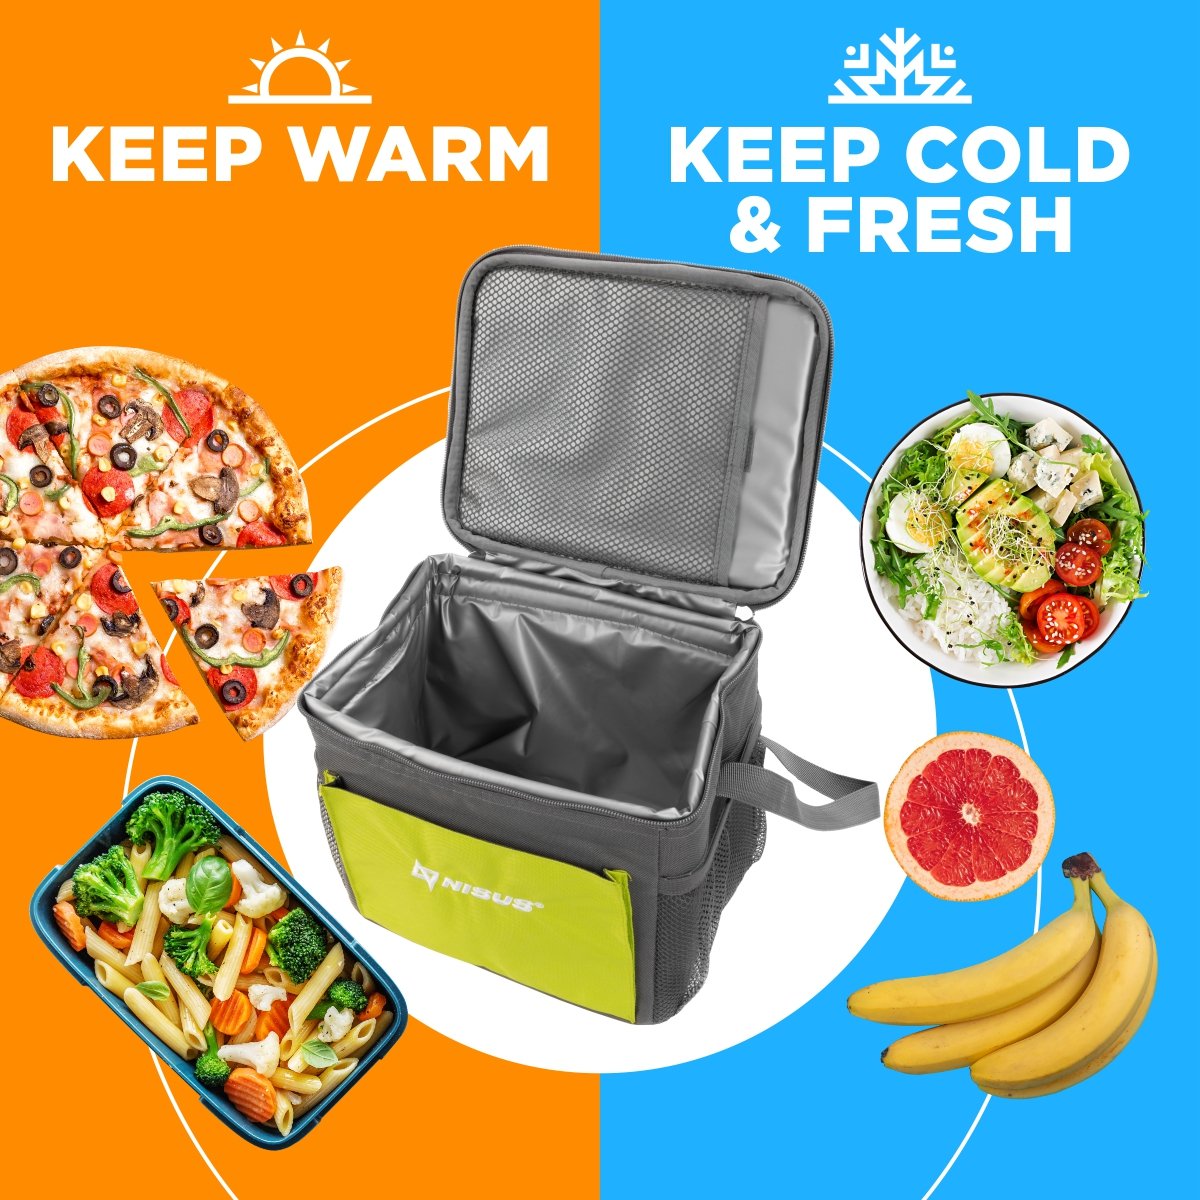 Beach Soft Sided Cooler Bag keeps food either warm or cold depending on your needs